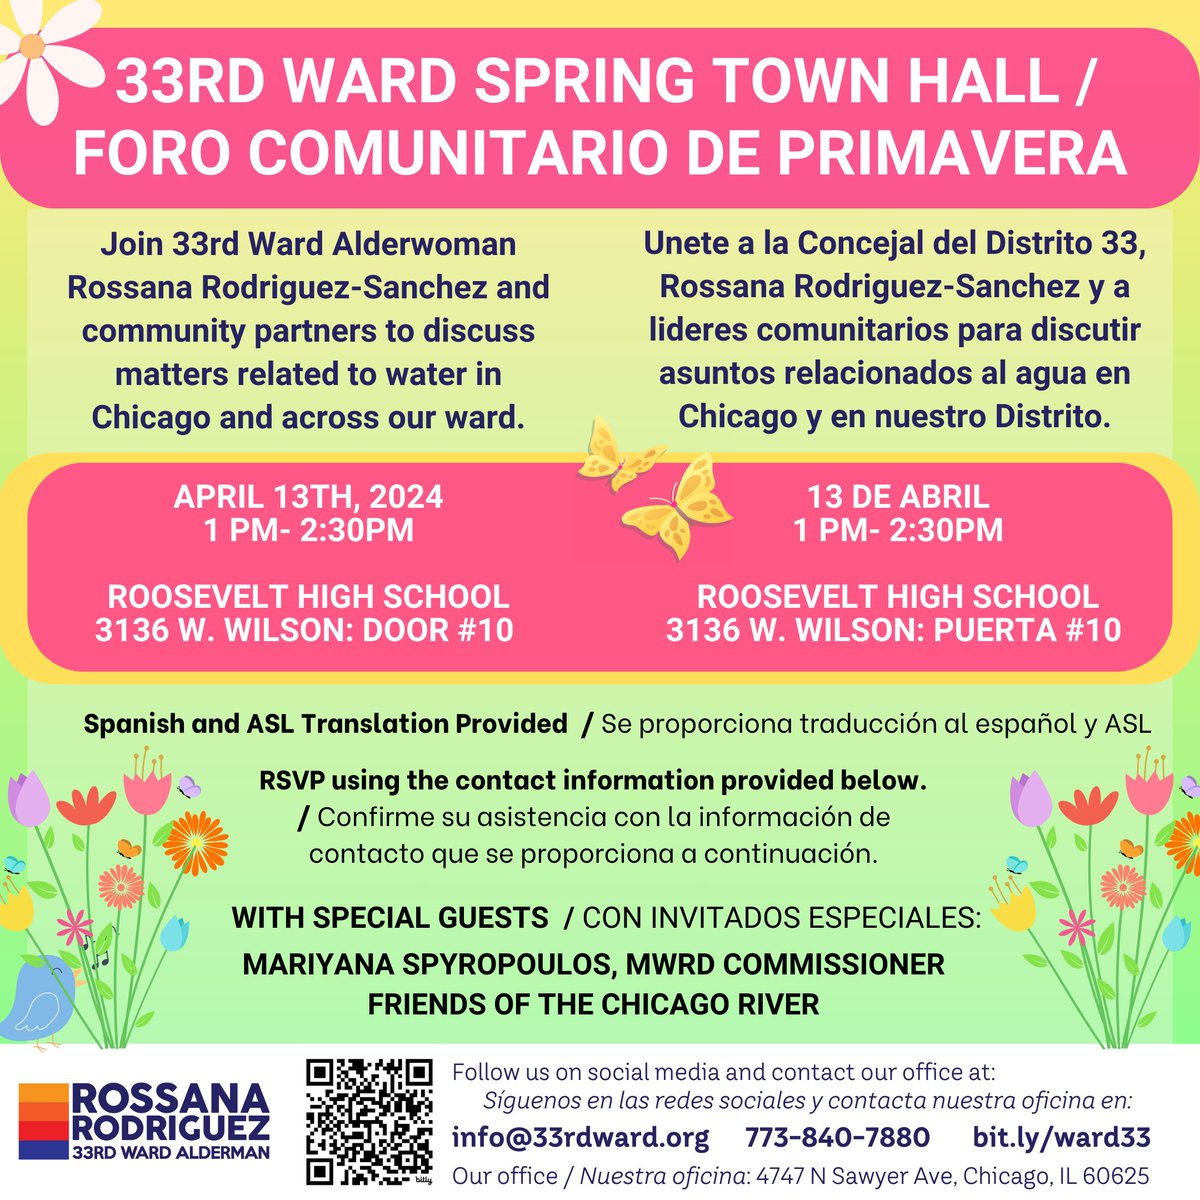 Join us for our Spring Townhall on April 13 from 1-2:30pm at Roosevelt High School. With guests MWRD Commissioner Spyropoulos and Friends of the Chicago River.